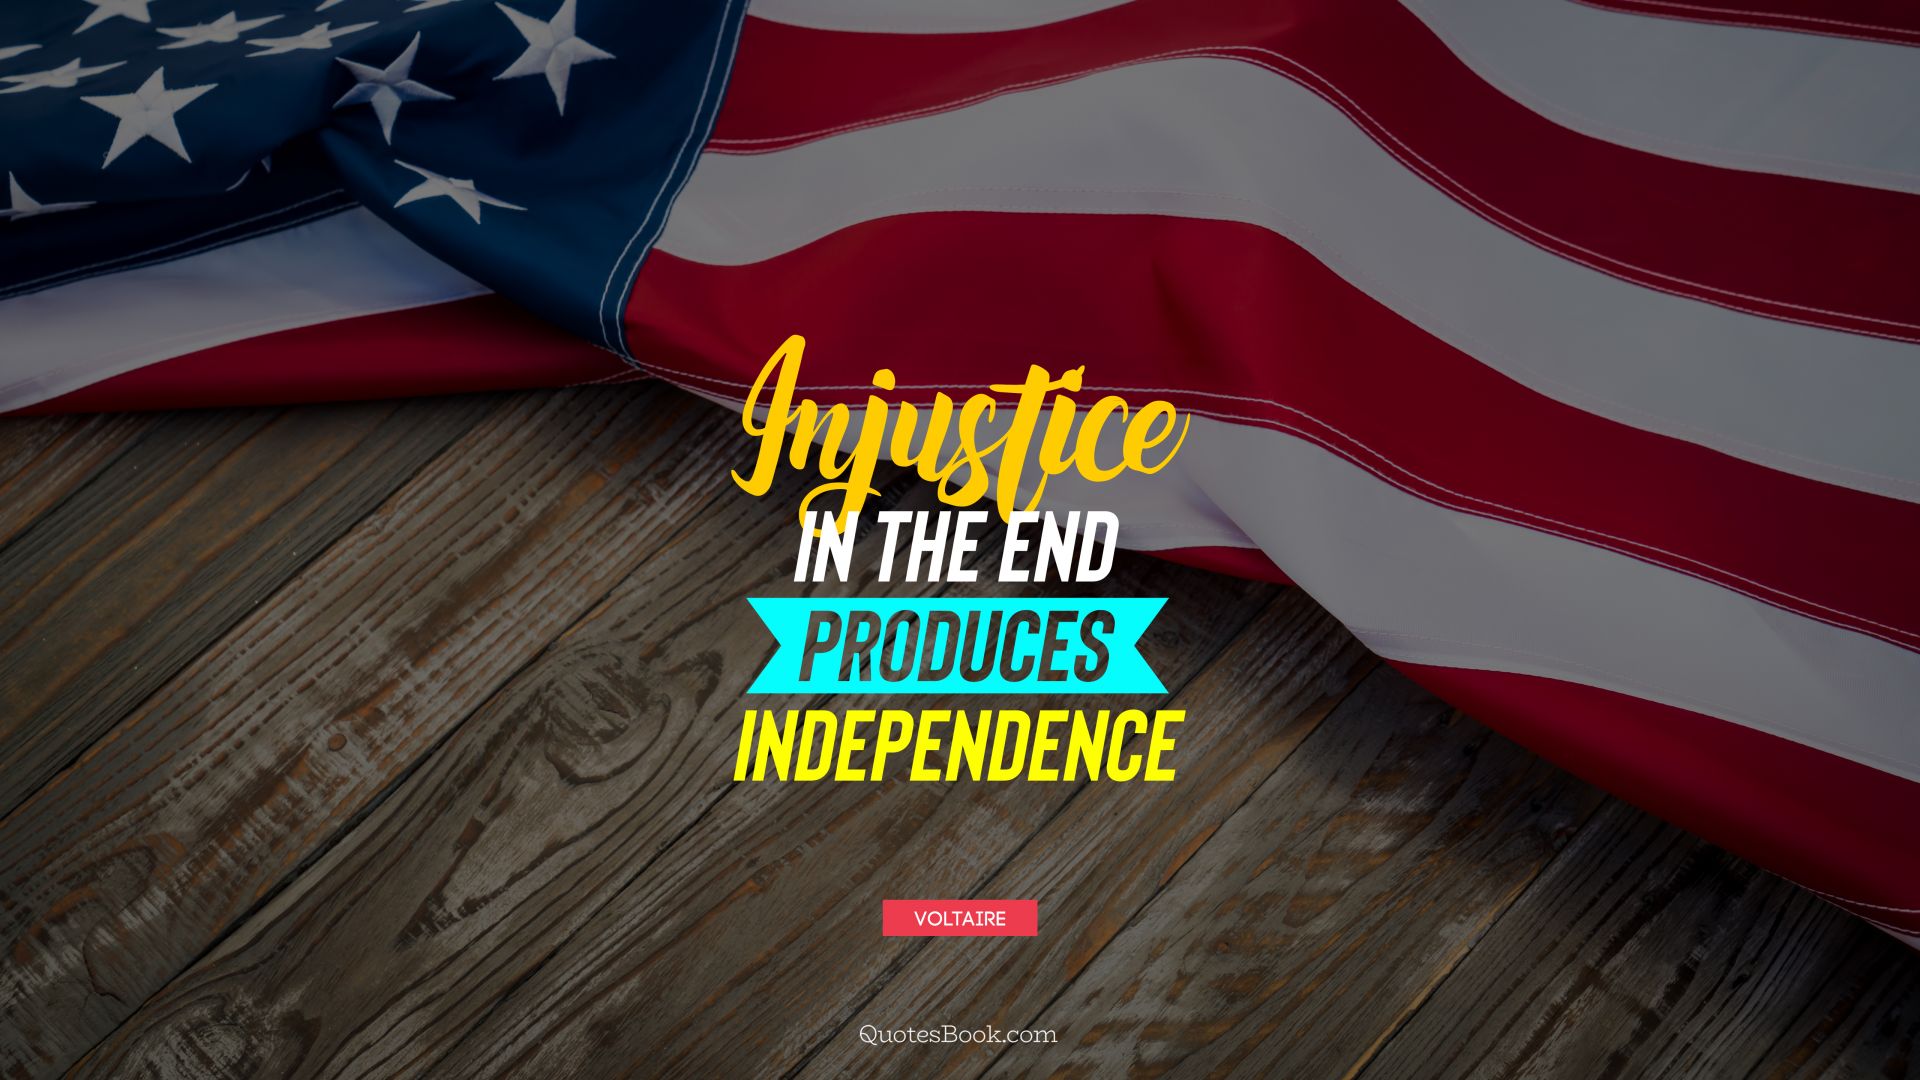 Injustice in the end produces independence. - Quote by Voltaire